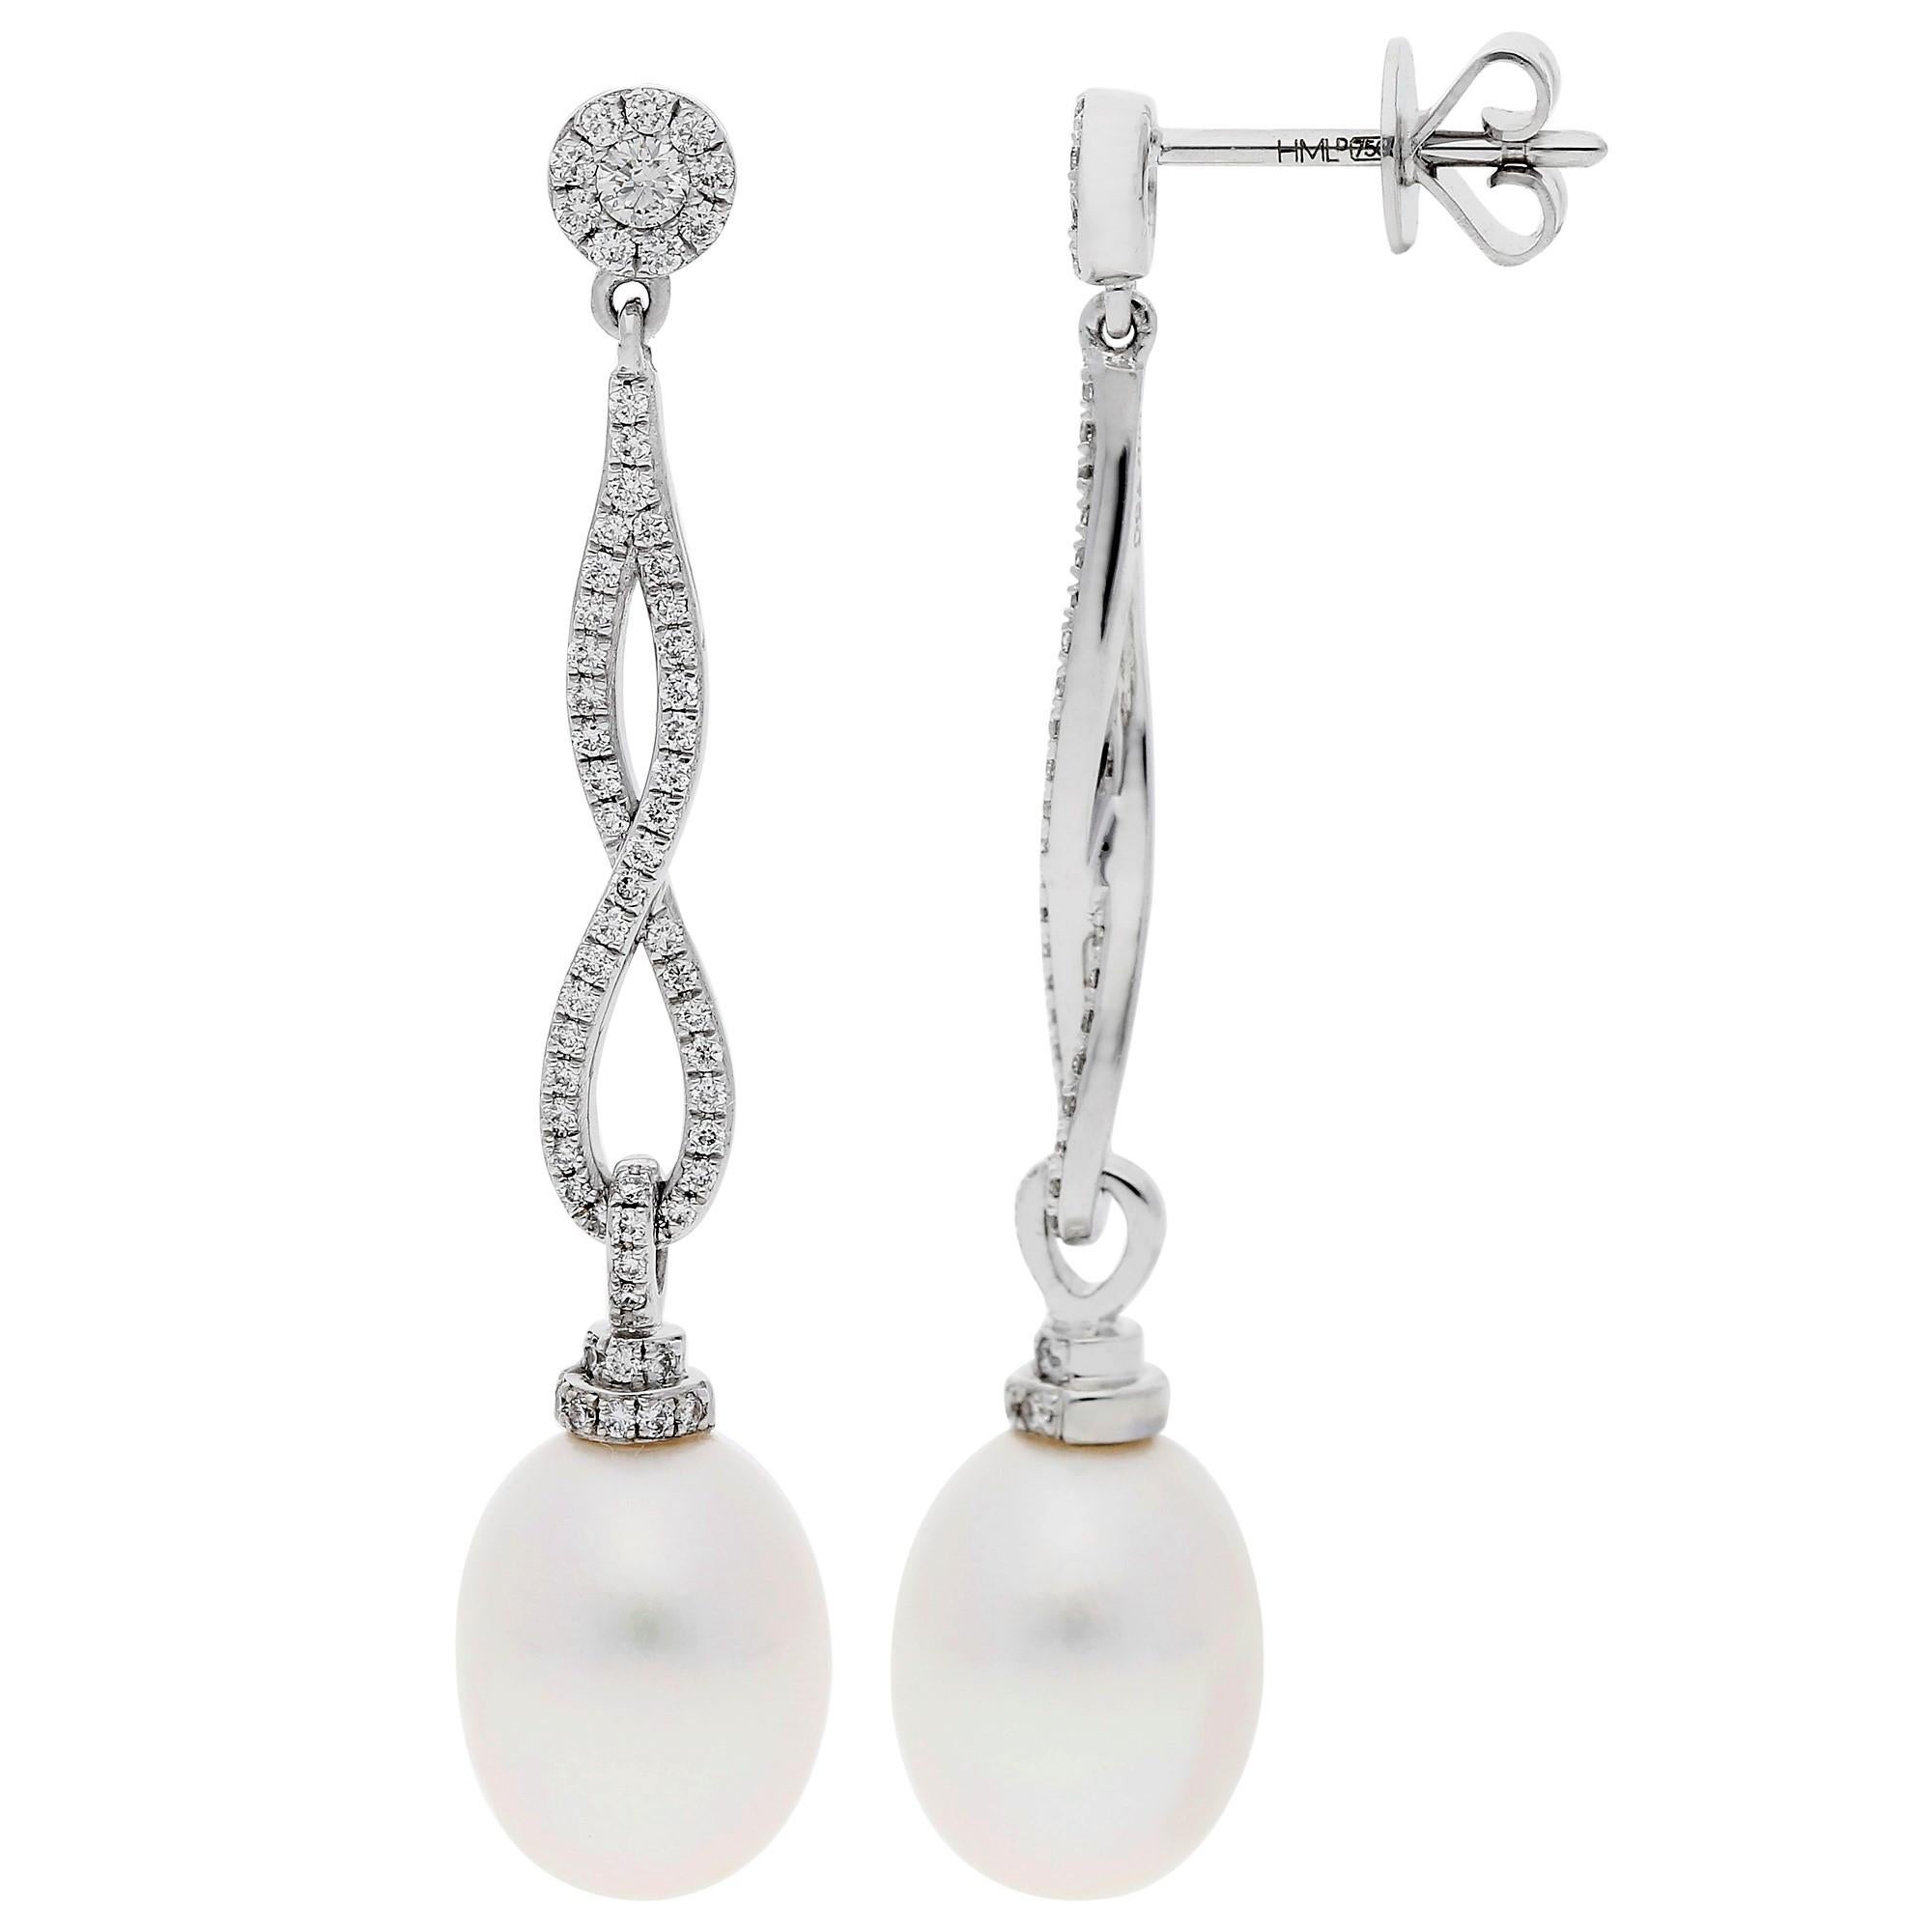 18ct White Gold Pearl & Diamond Infinity Drop Earrings

Embrace timeless elegance with our 18ct White Gold Pearl & Diamond Infinity Drop Earrings, a symbol of endless sophistication. Each earring features a lustrous, plump white pearl, epitomizing